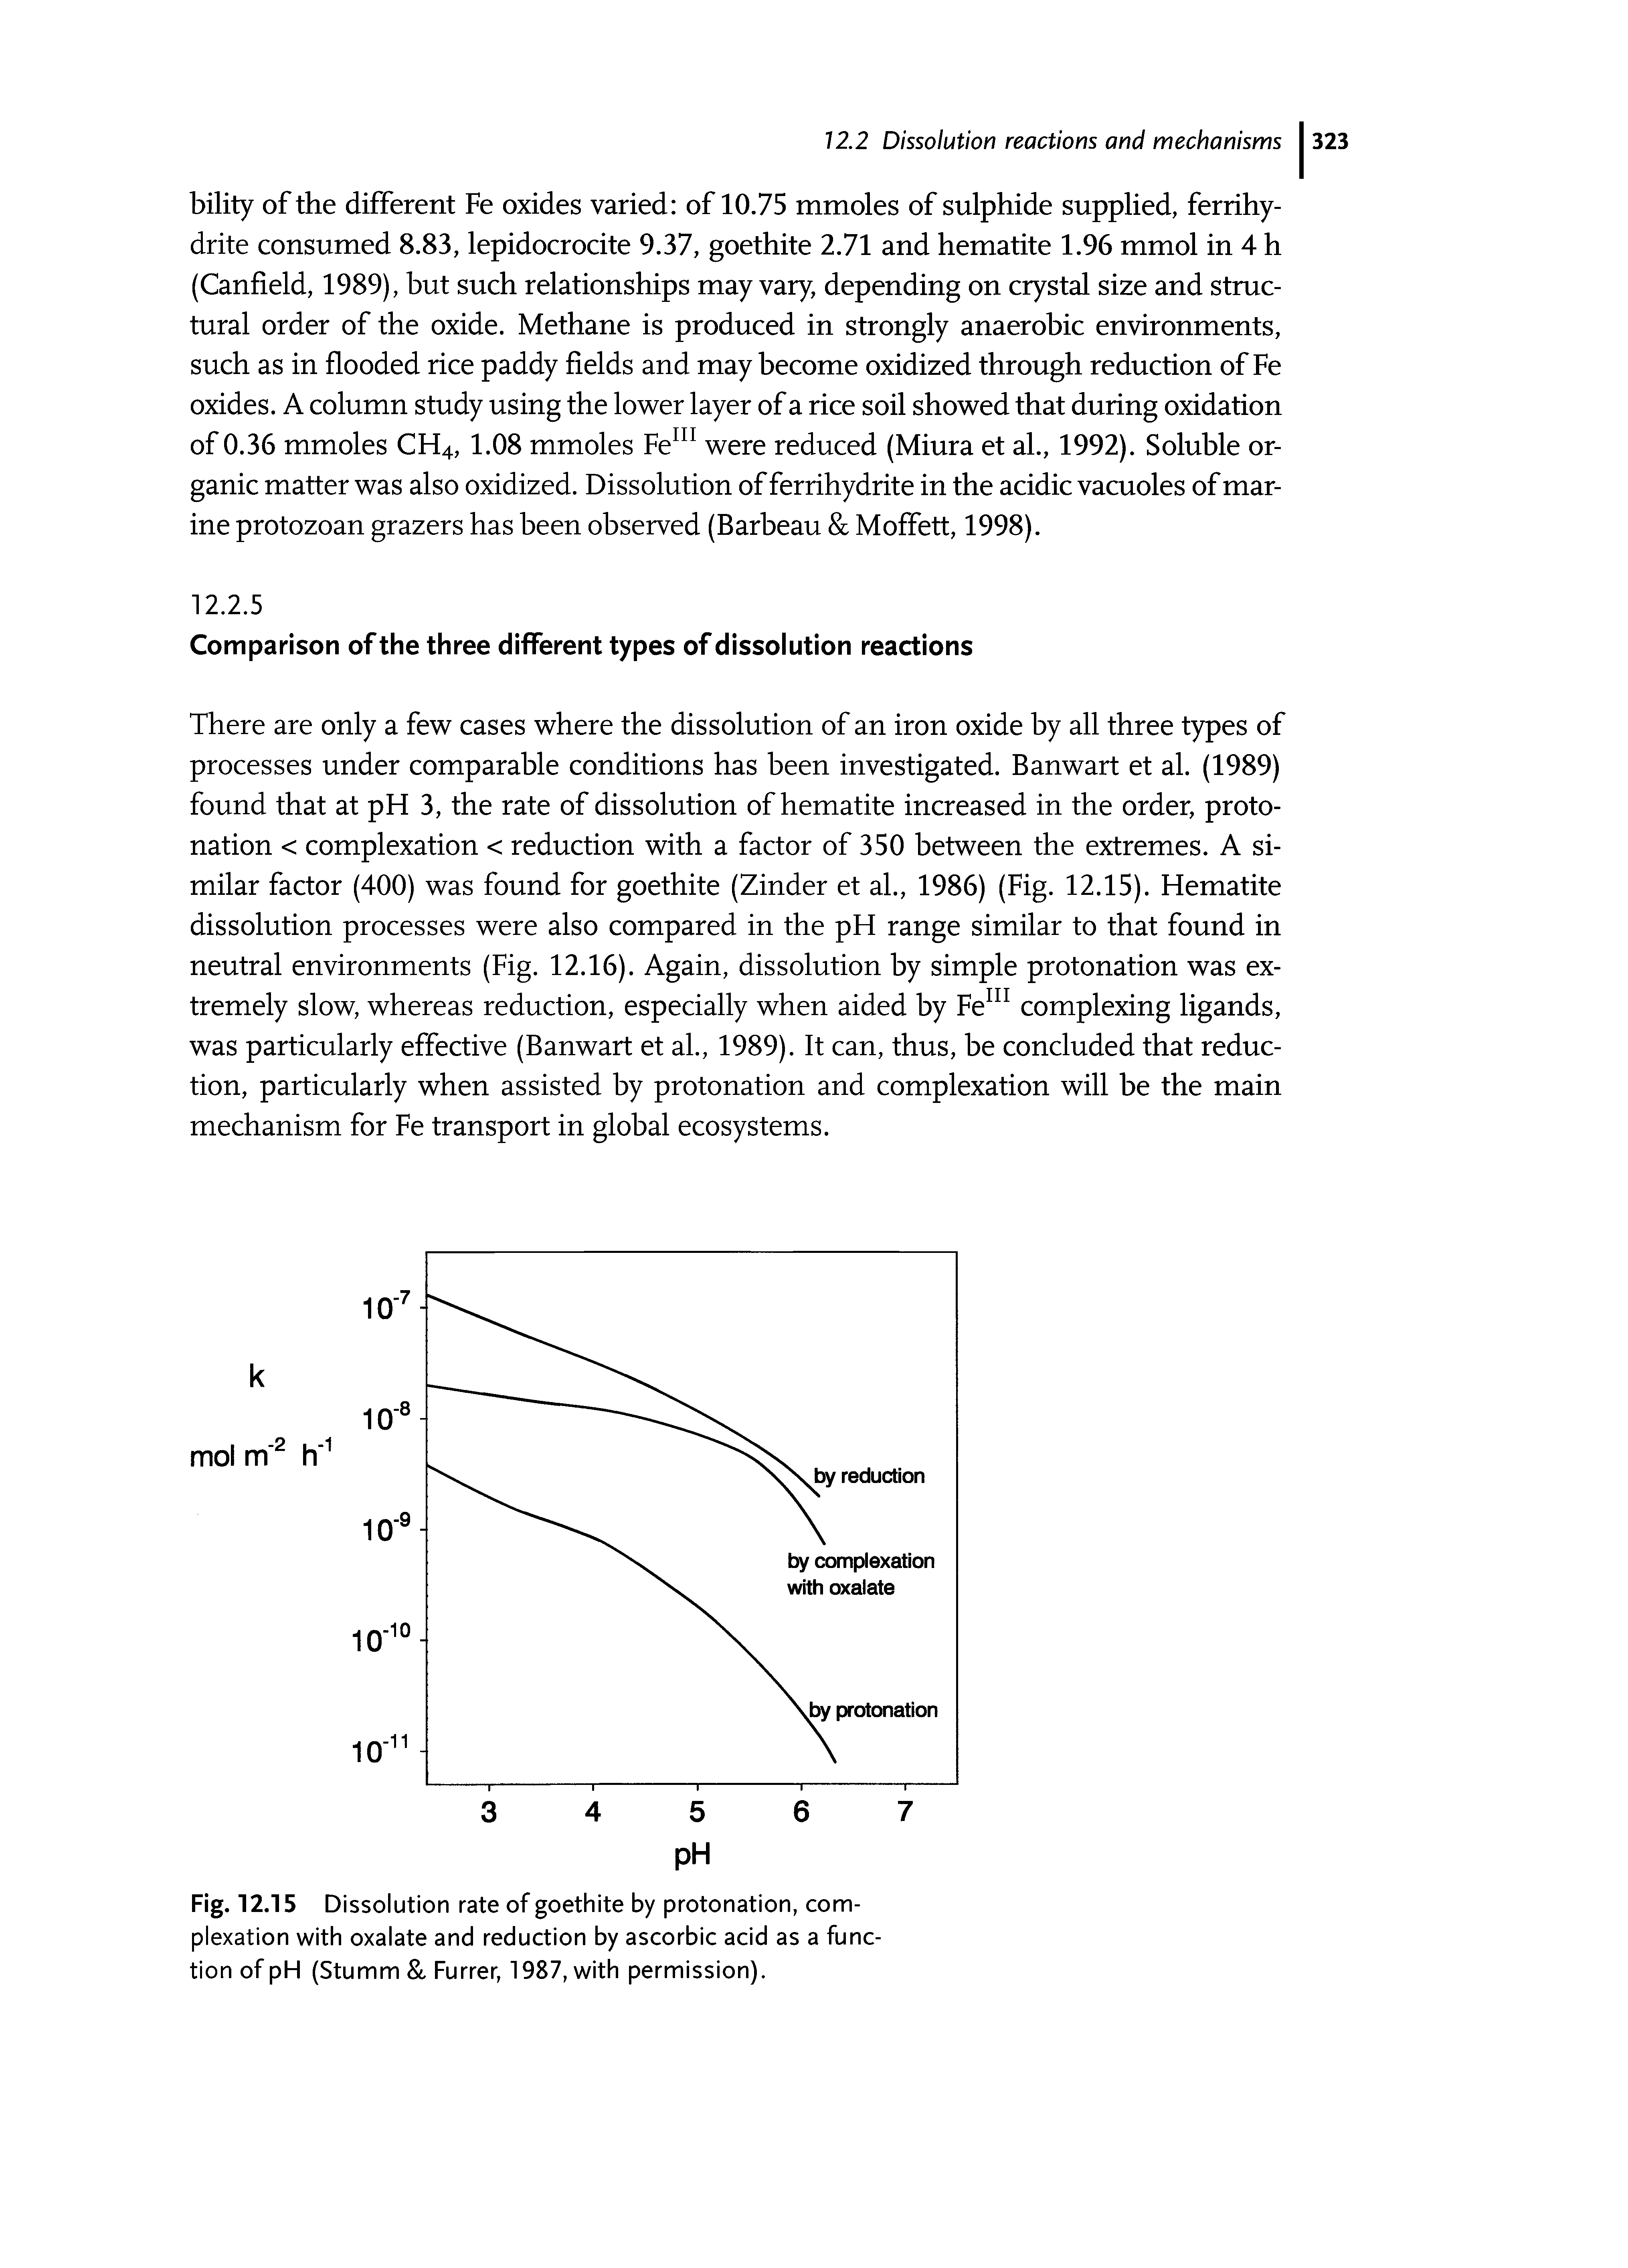 Fig. 12.15 Di ssolution rate of goethite by protonation, complexation with oxalate and reduction by ascorbic acid as a function of pH (Stumm, Furrer, 1987, with permission).